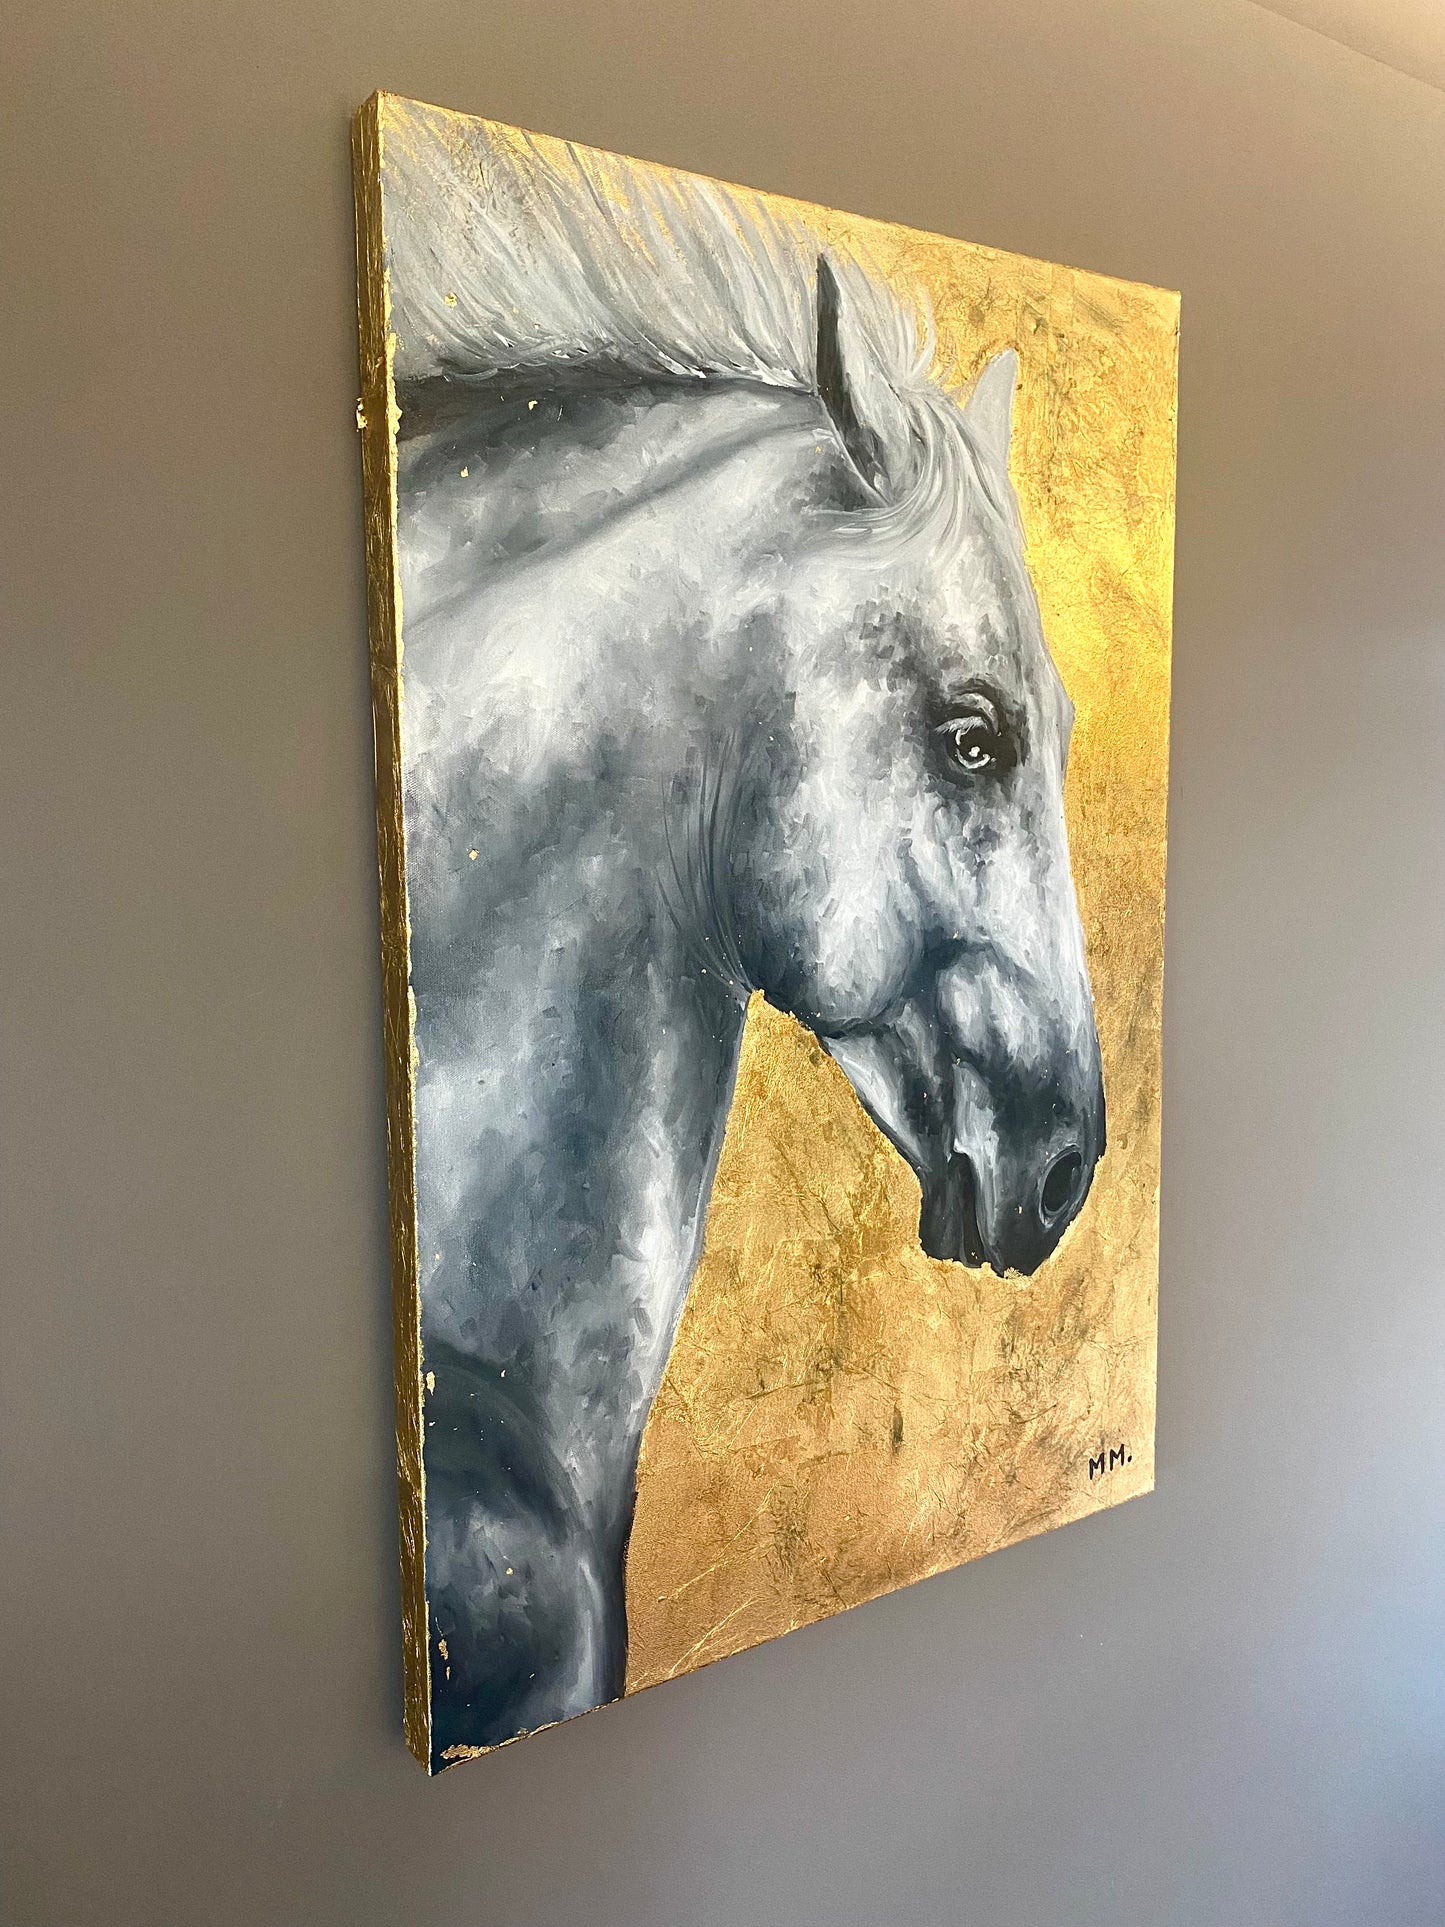 Original Handpainted Contemporary Horse Oil Painting Portrait With Gold Leaf